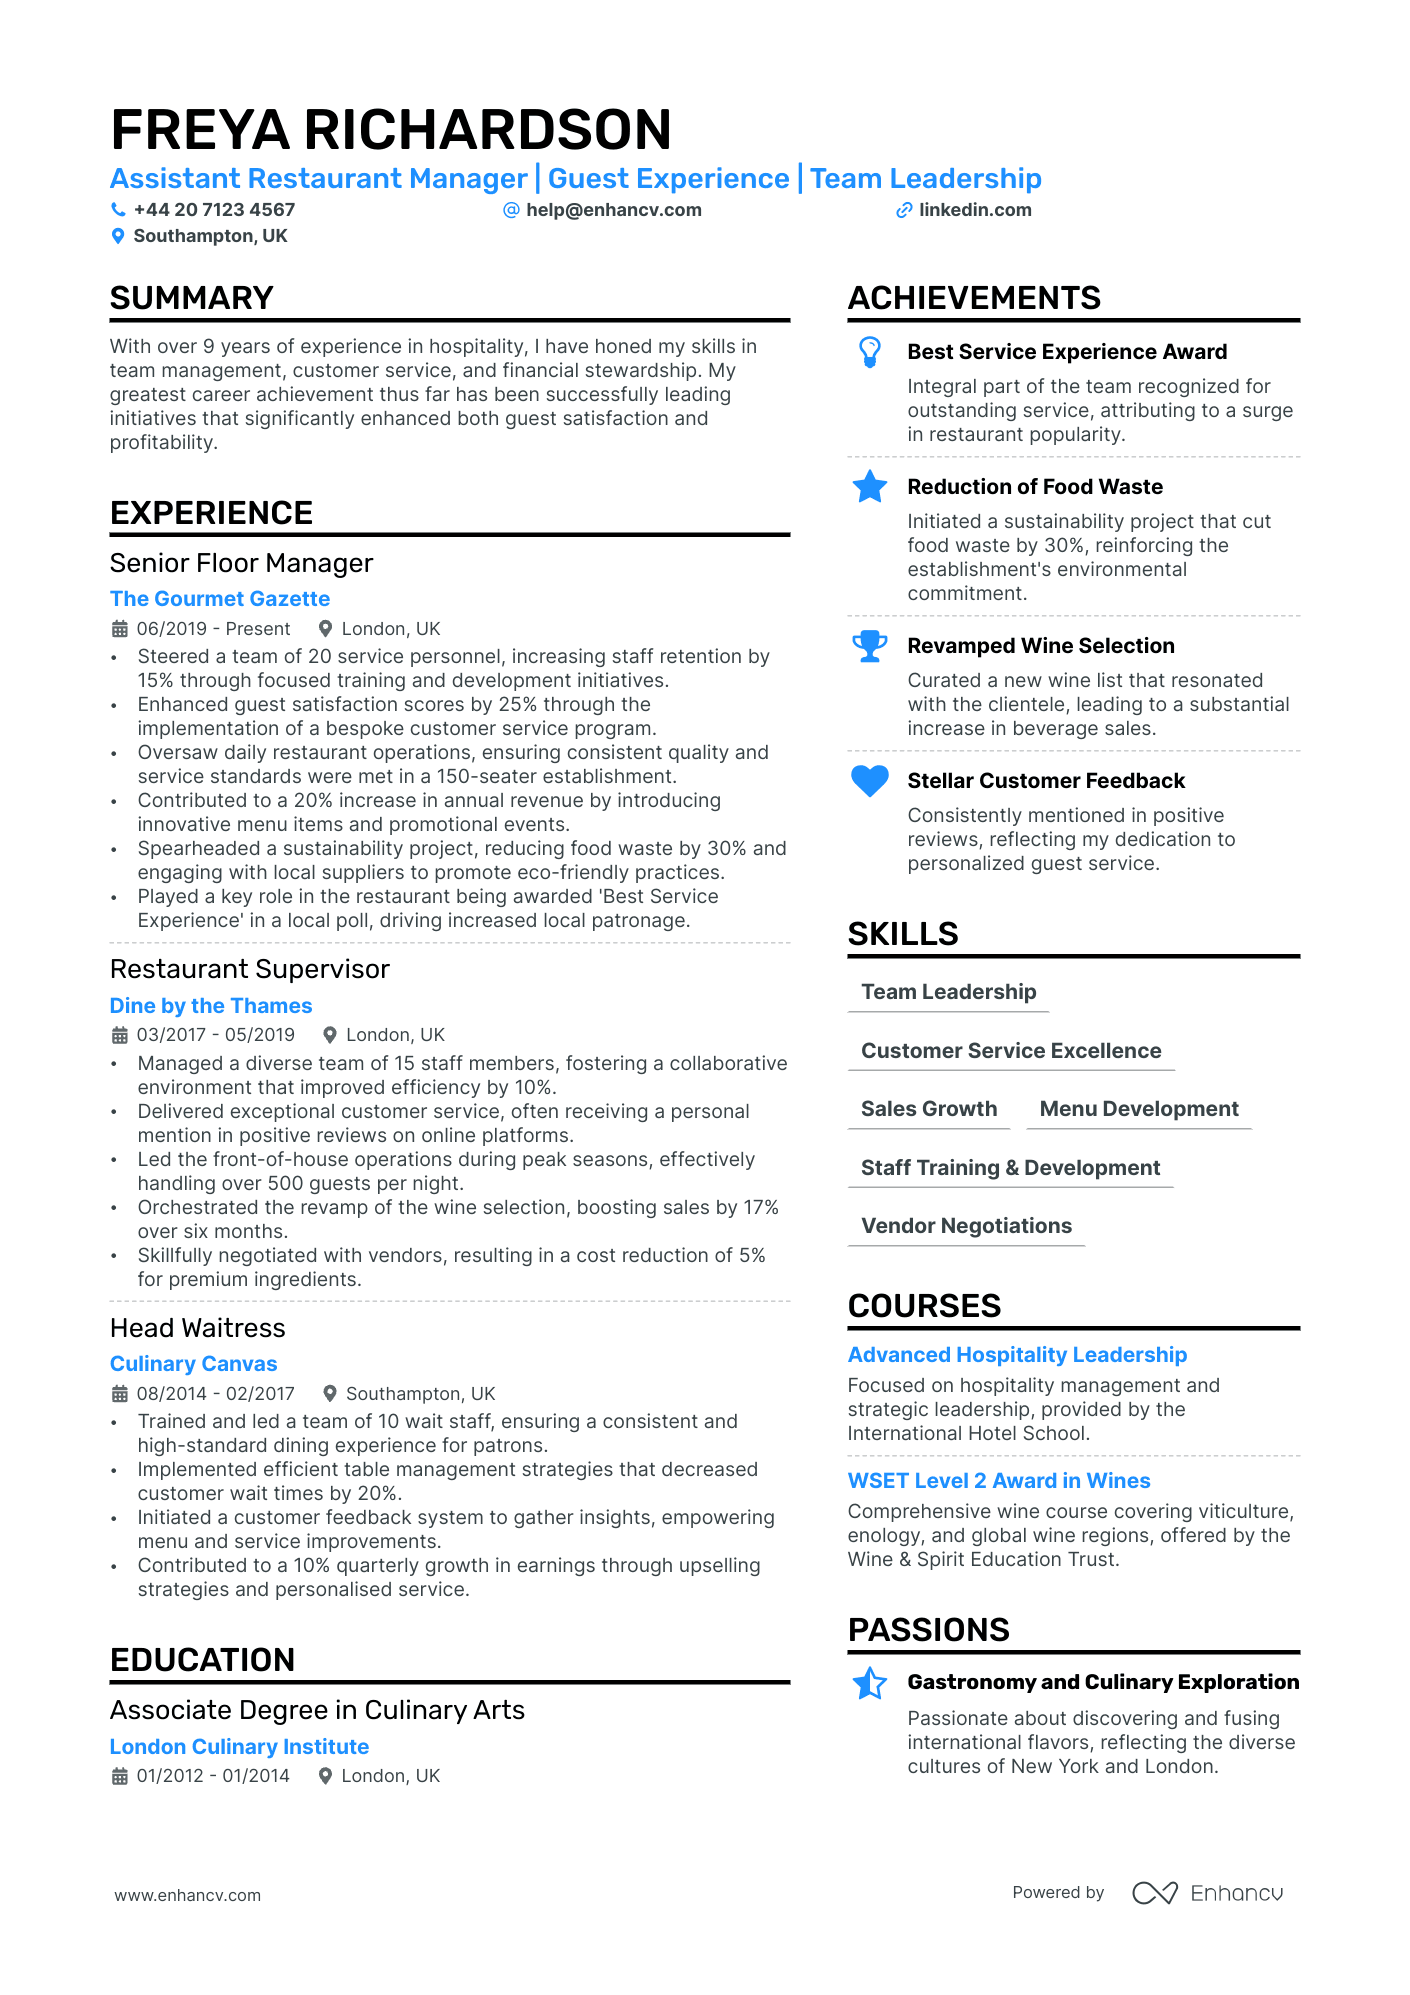 Assistant Restaurant Manager cv example